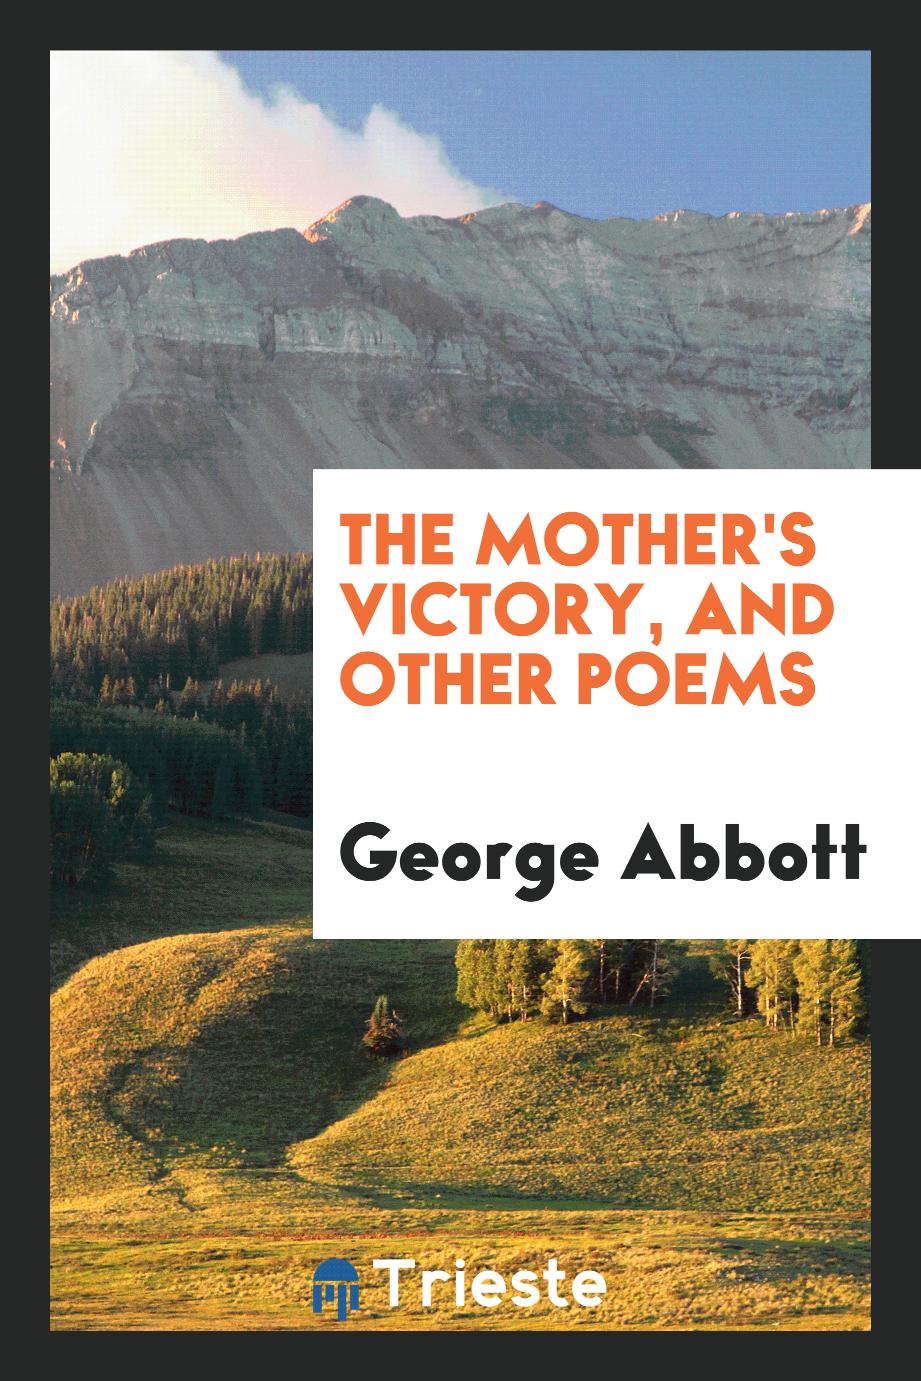 The Mother's Victory, and Other Poems